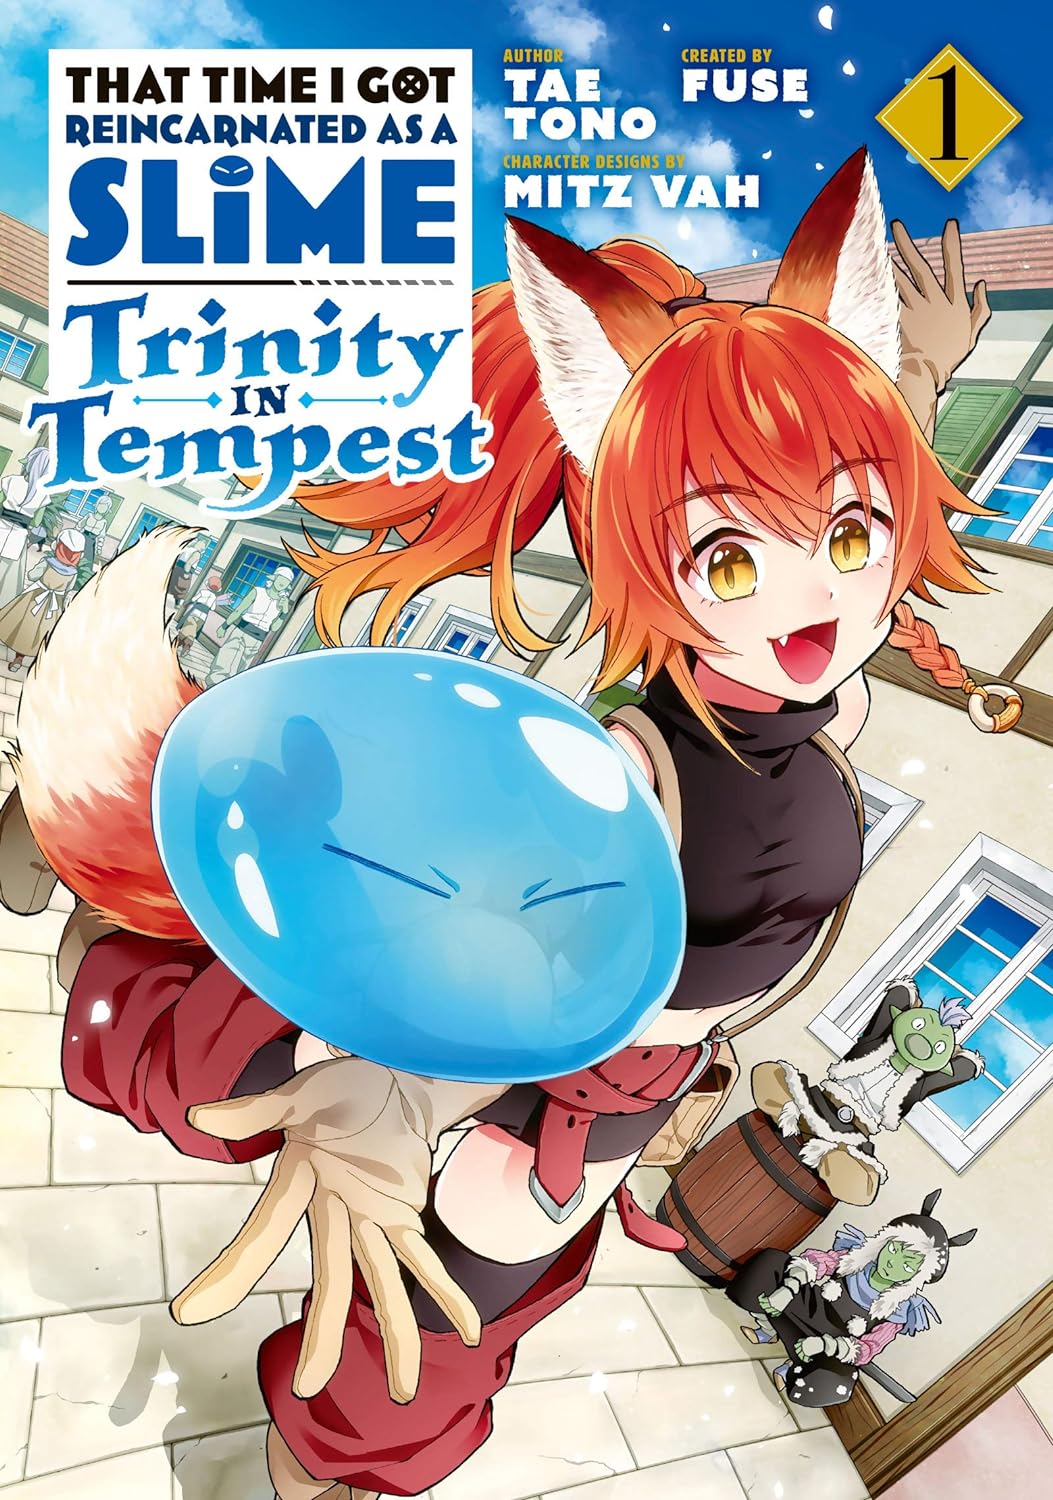 That Time I Got Reincarnated as a Slime: Trinity in Tempest Vol. 1 Manga